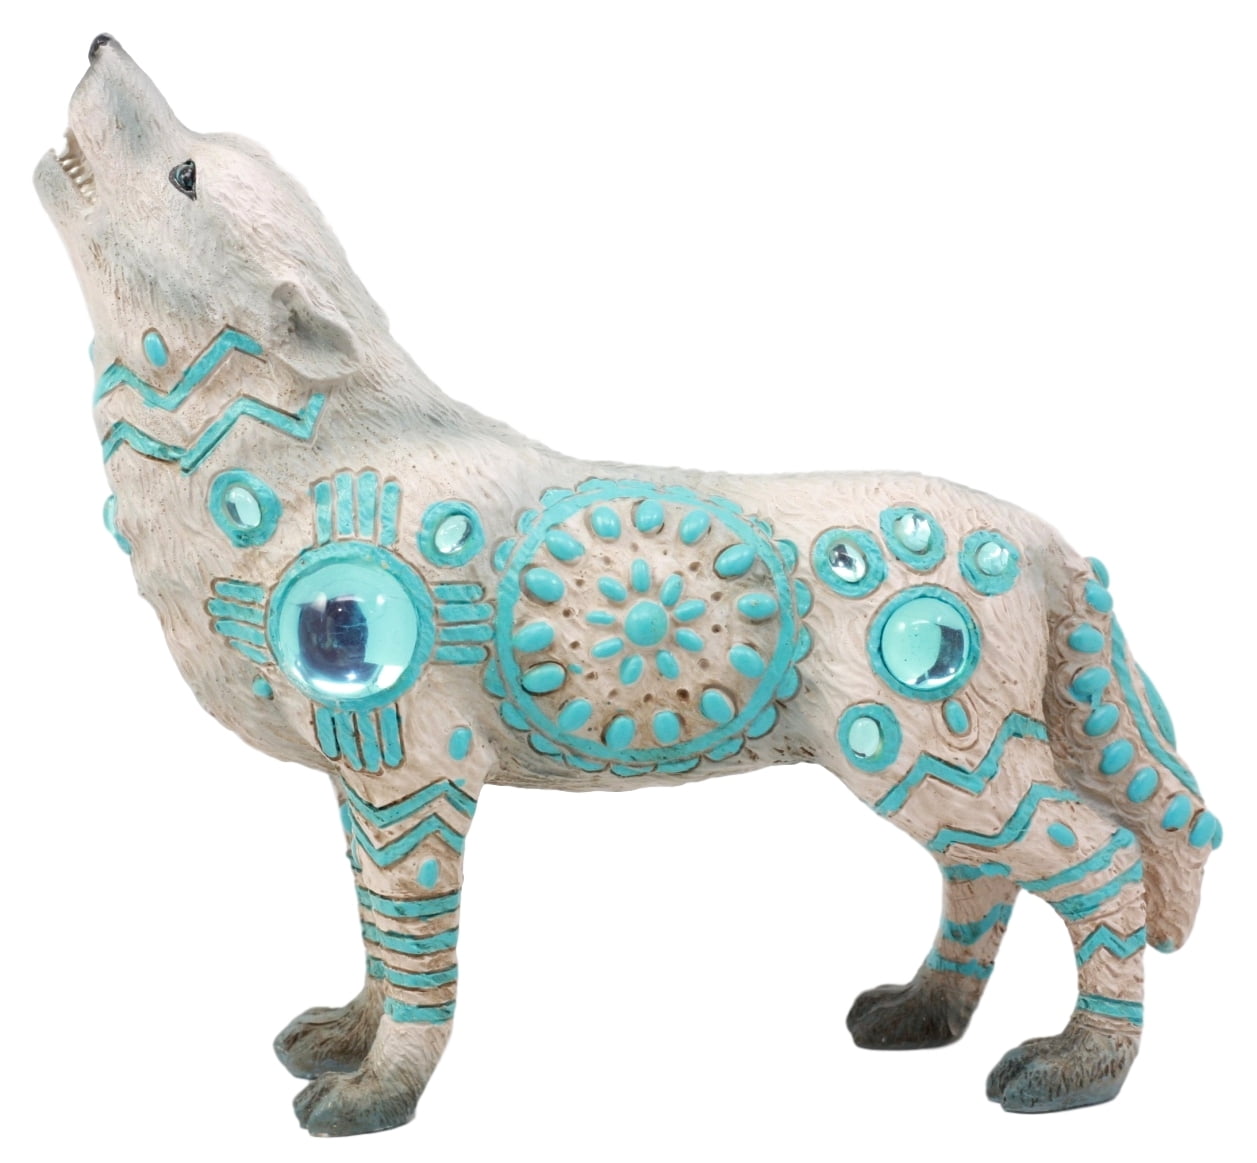 Native American Indian Warrior Praying with Wolf Statue Sculpture Figurine Gift 